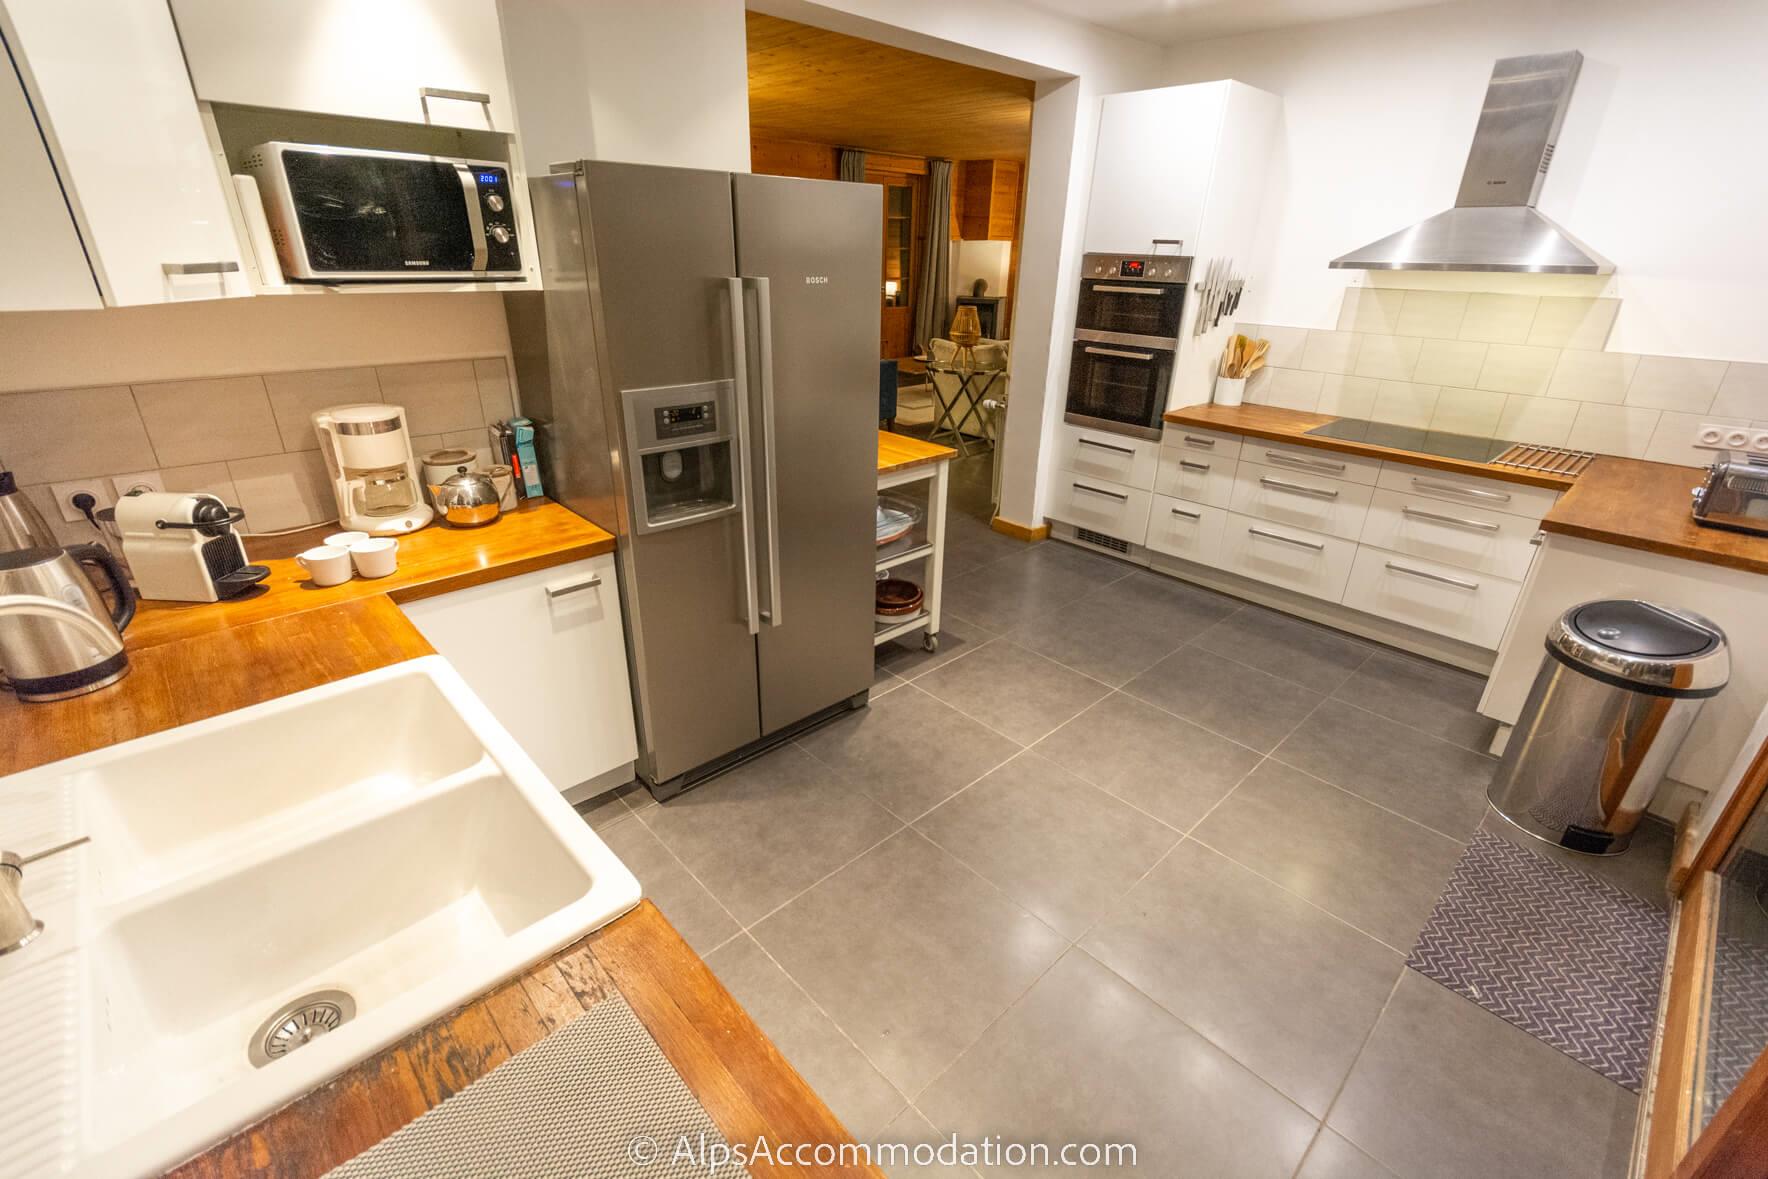 La Maison Blanche Samoëns - Bright and spacious fully equipped kitchen leading out to garden and hot tub